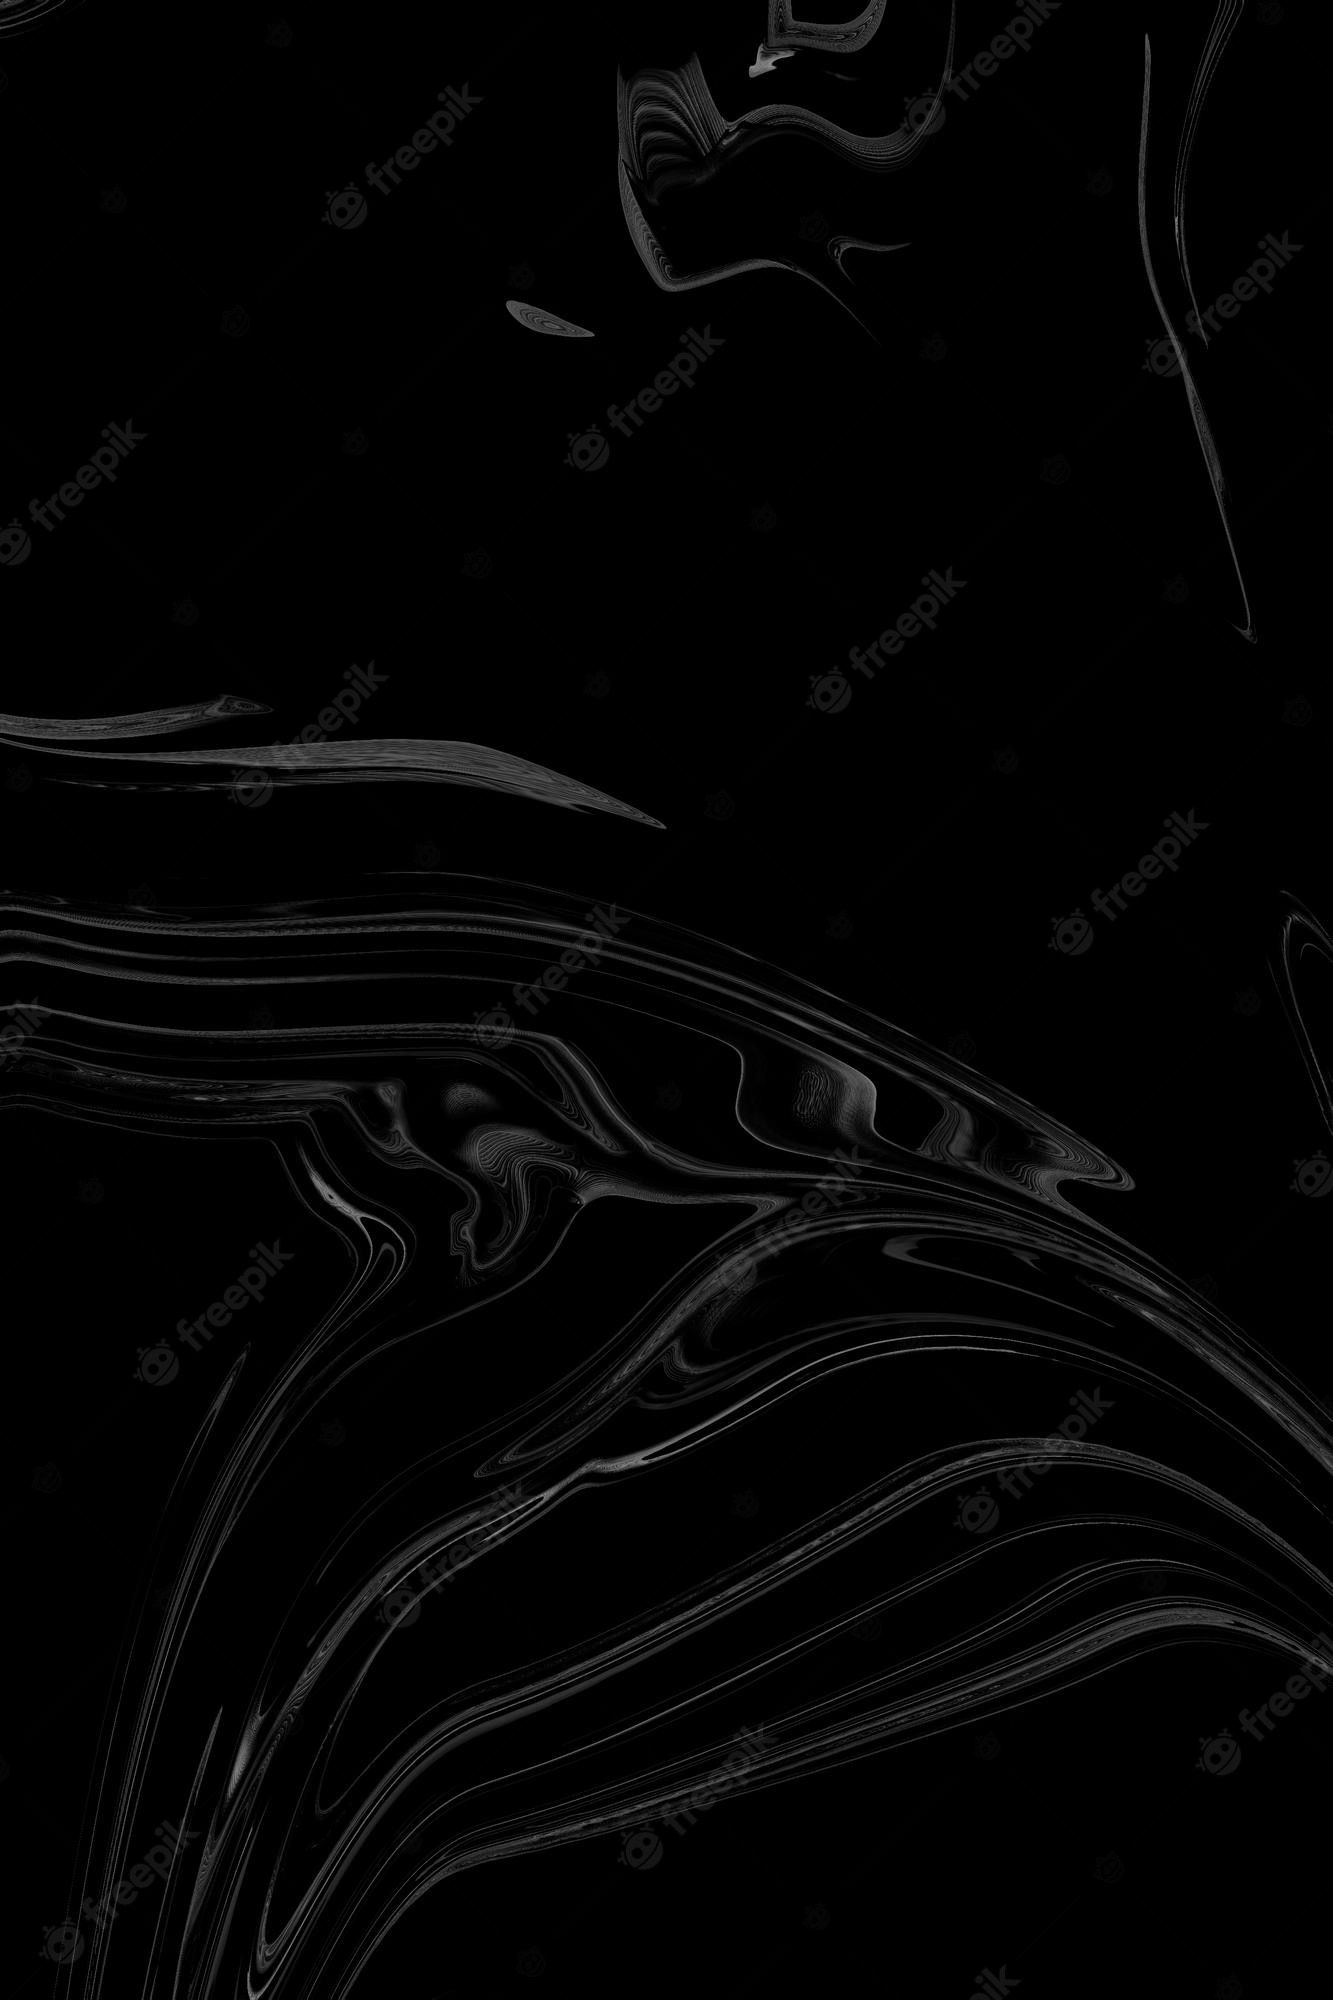 A black and white abstract background with waves - Grunge